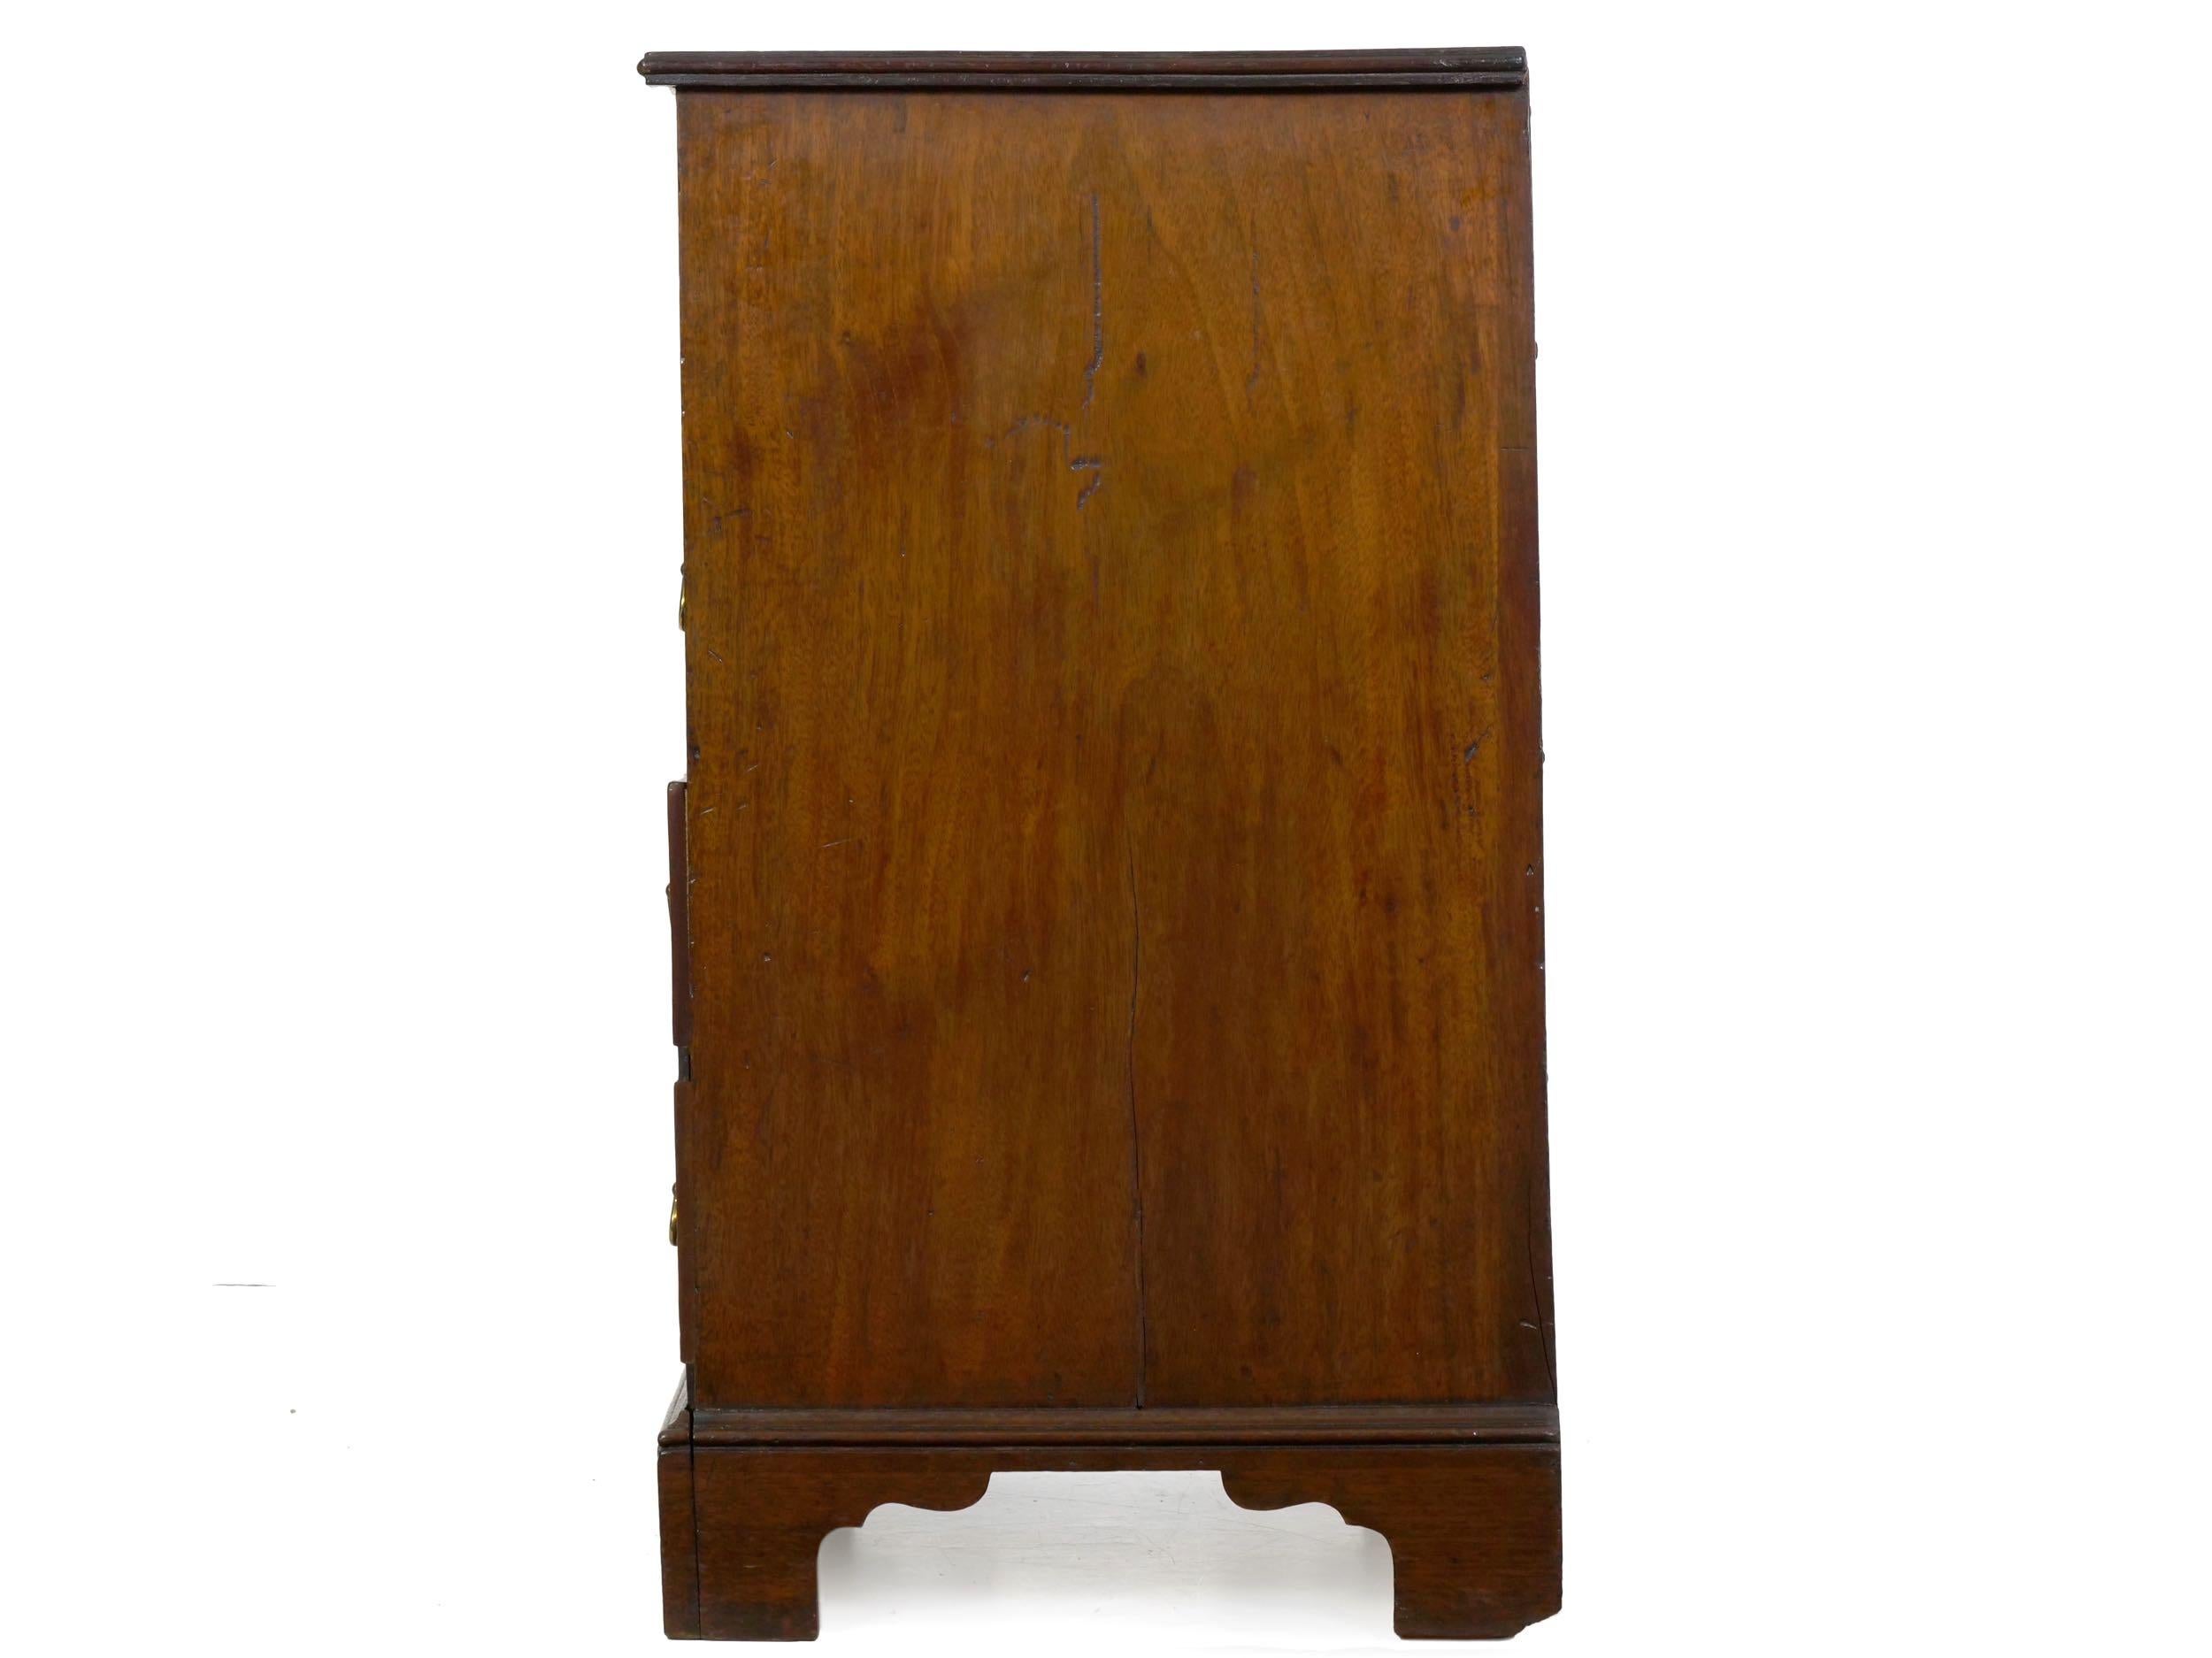 19th Century English Mahogany Antique Bedside Nightstand Table / Office Cabinet 2